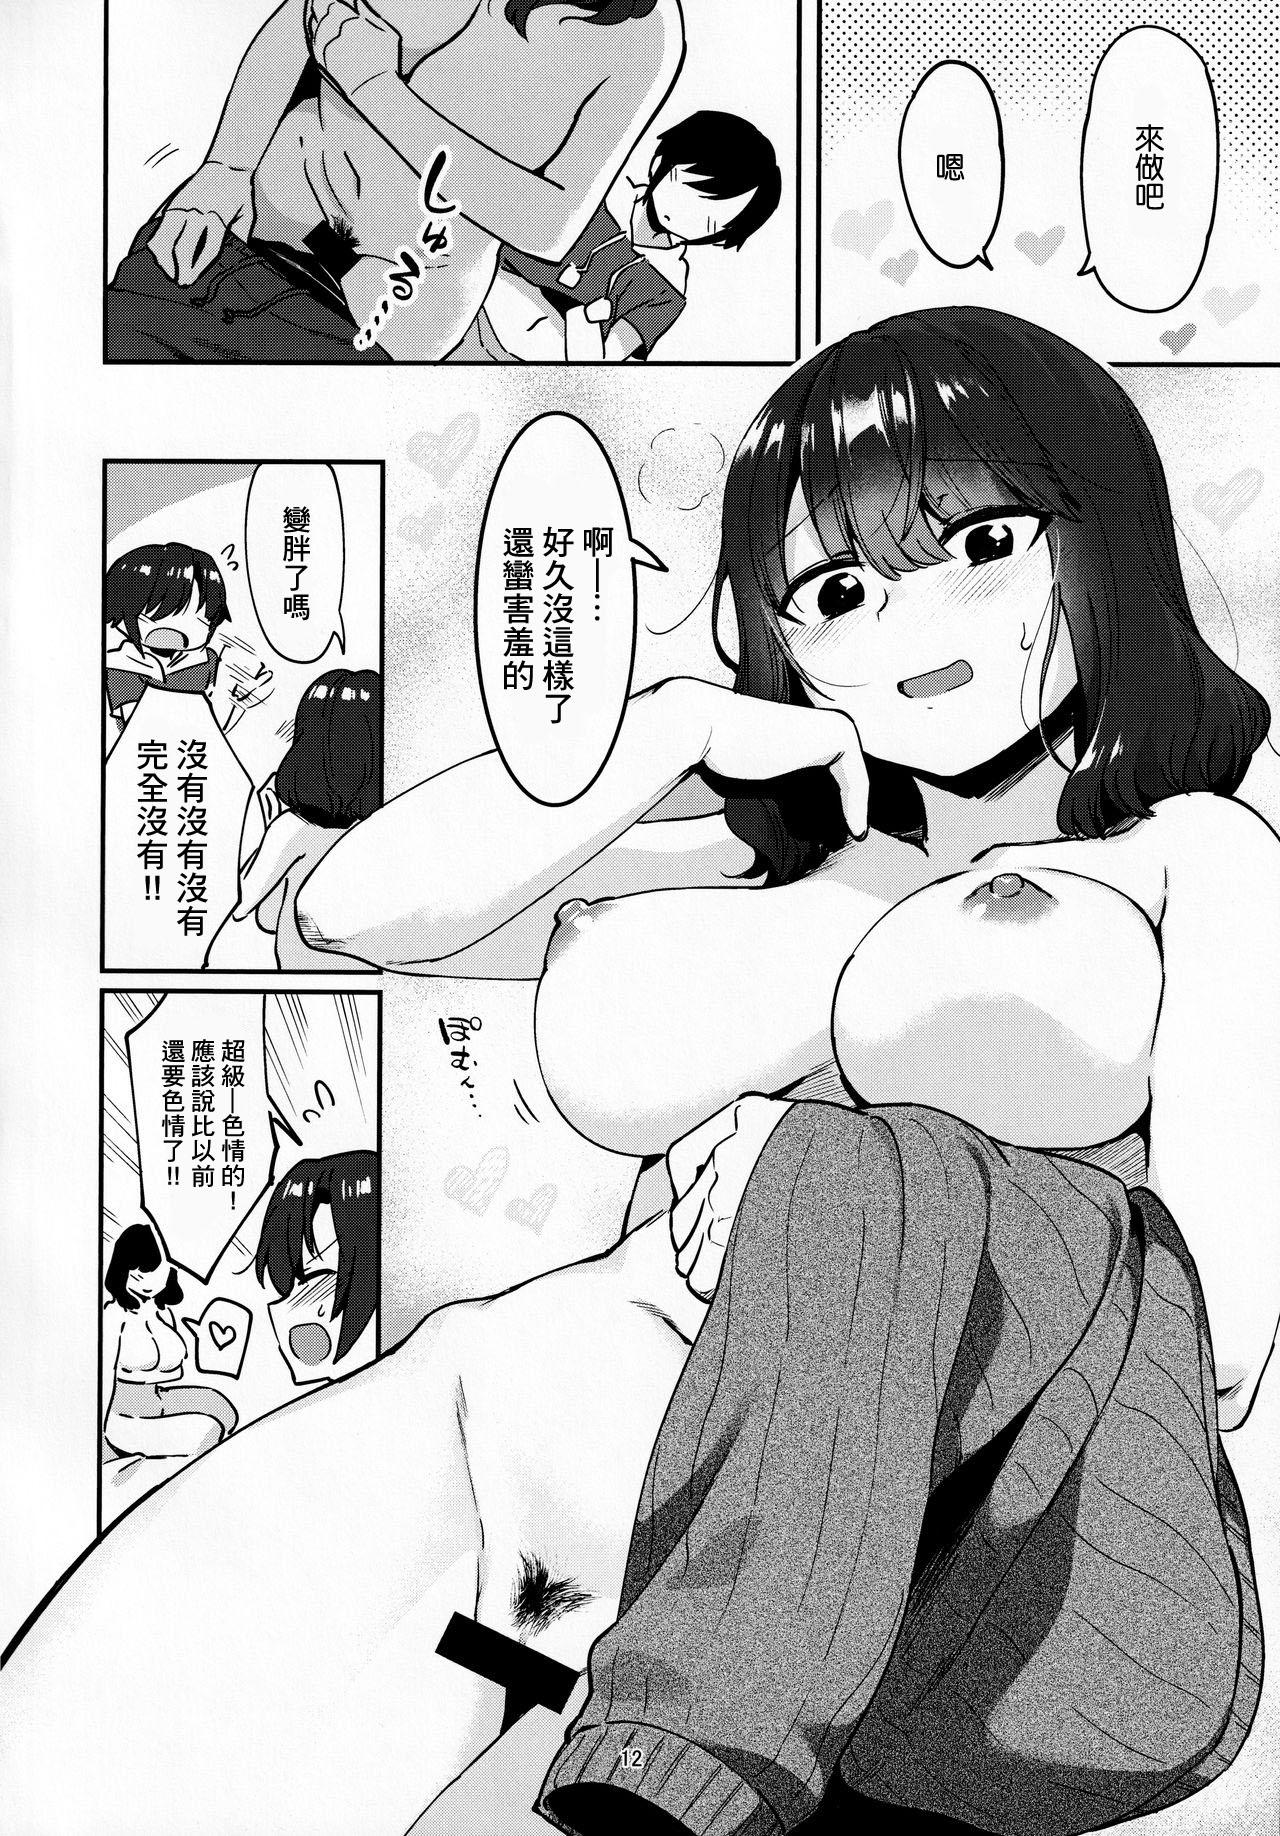 Bucetuda 昔してた姉弟 Sextoy - Page 11